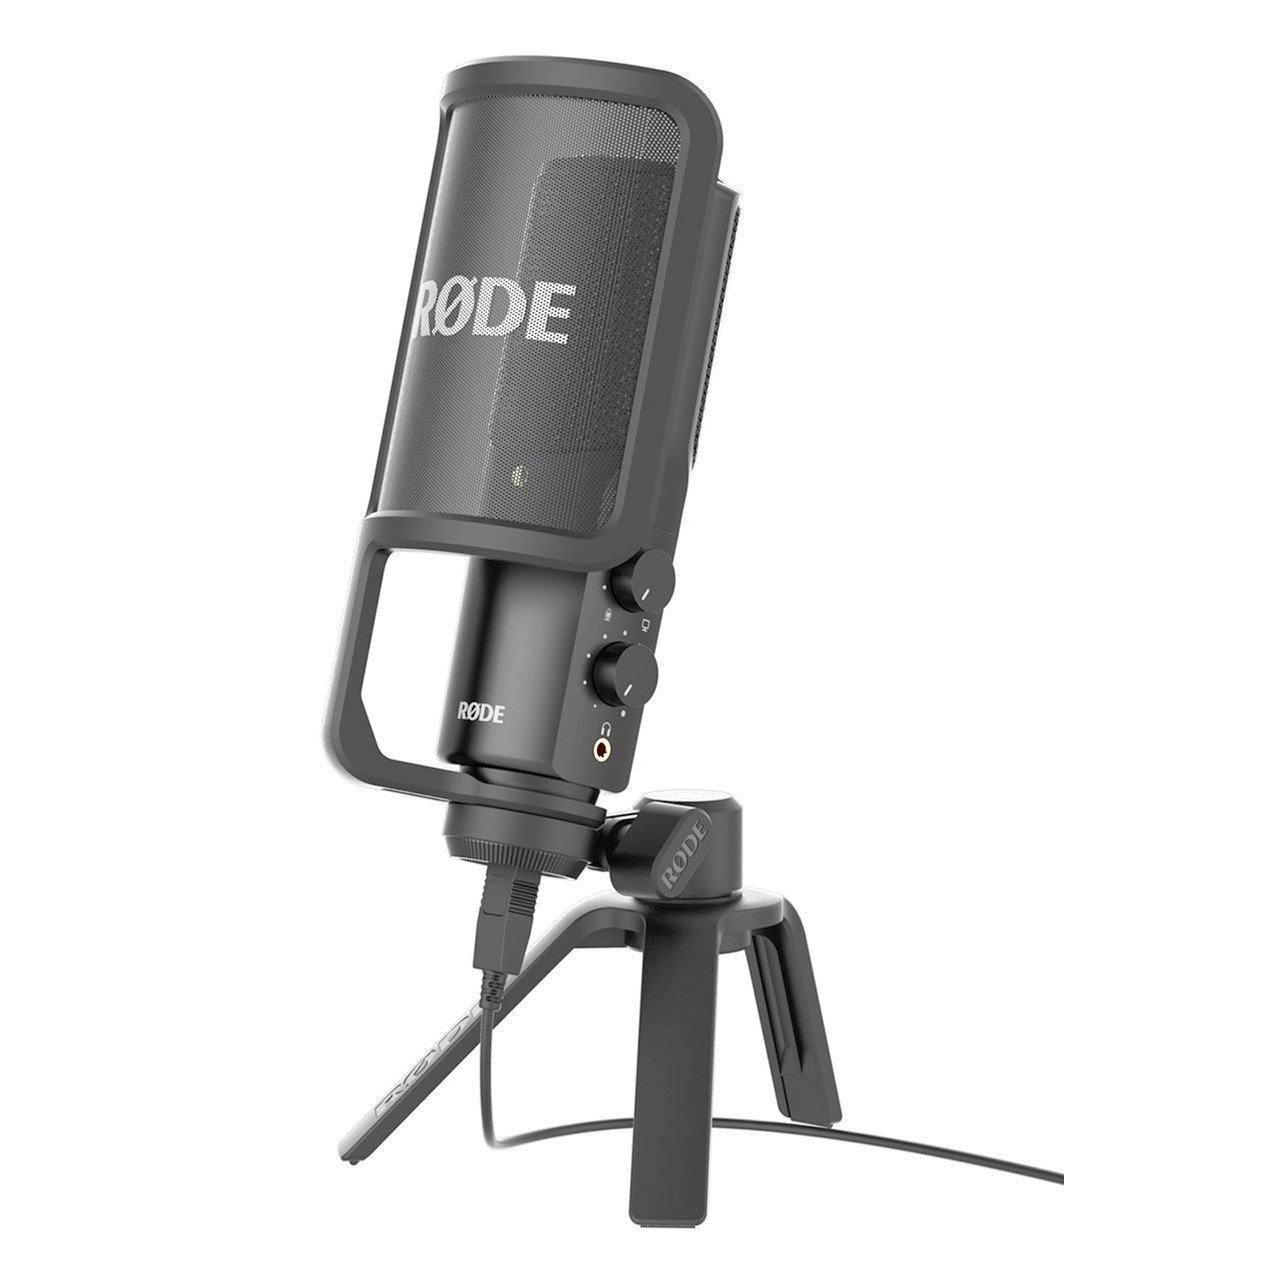 NT-USB Versatile Studio-Quality USB Microphone - Live & Recording - Microphones by RODE at Muso's Stuff